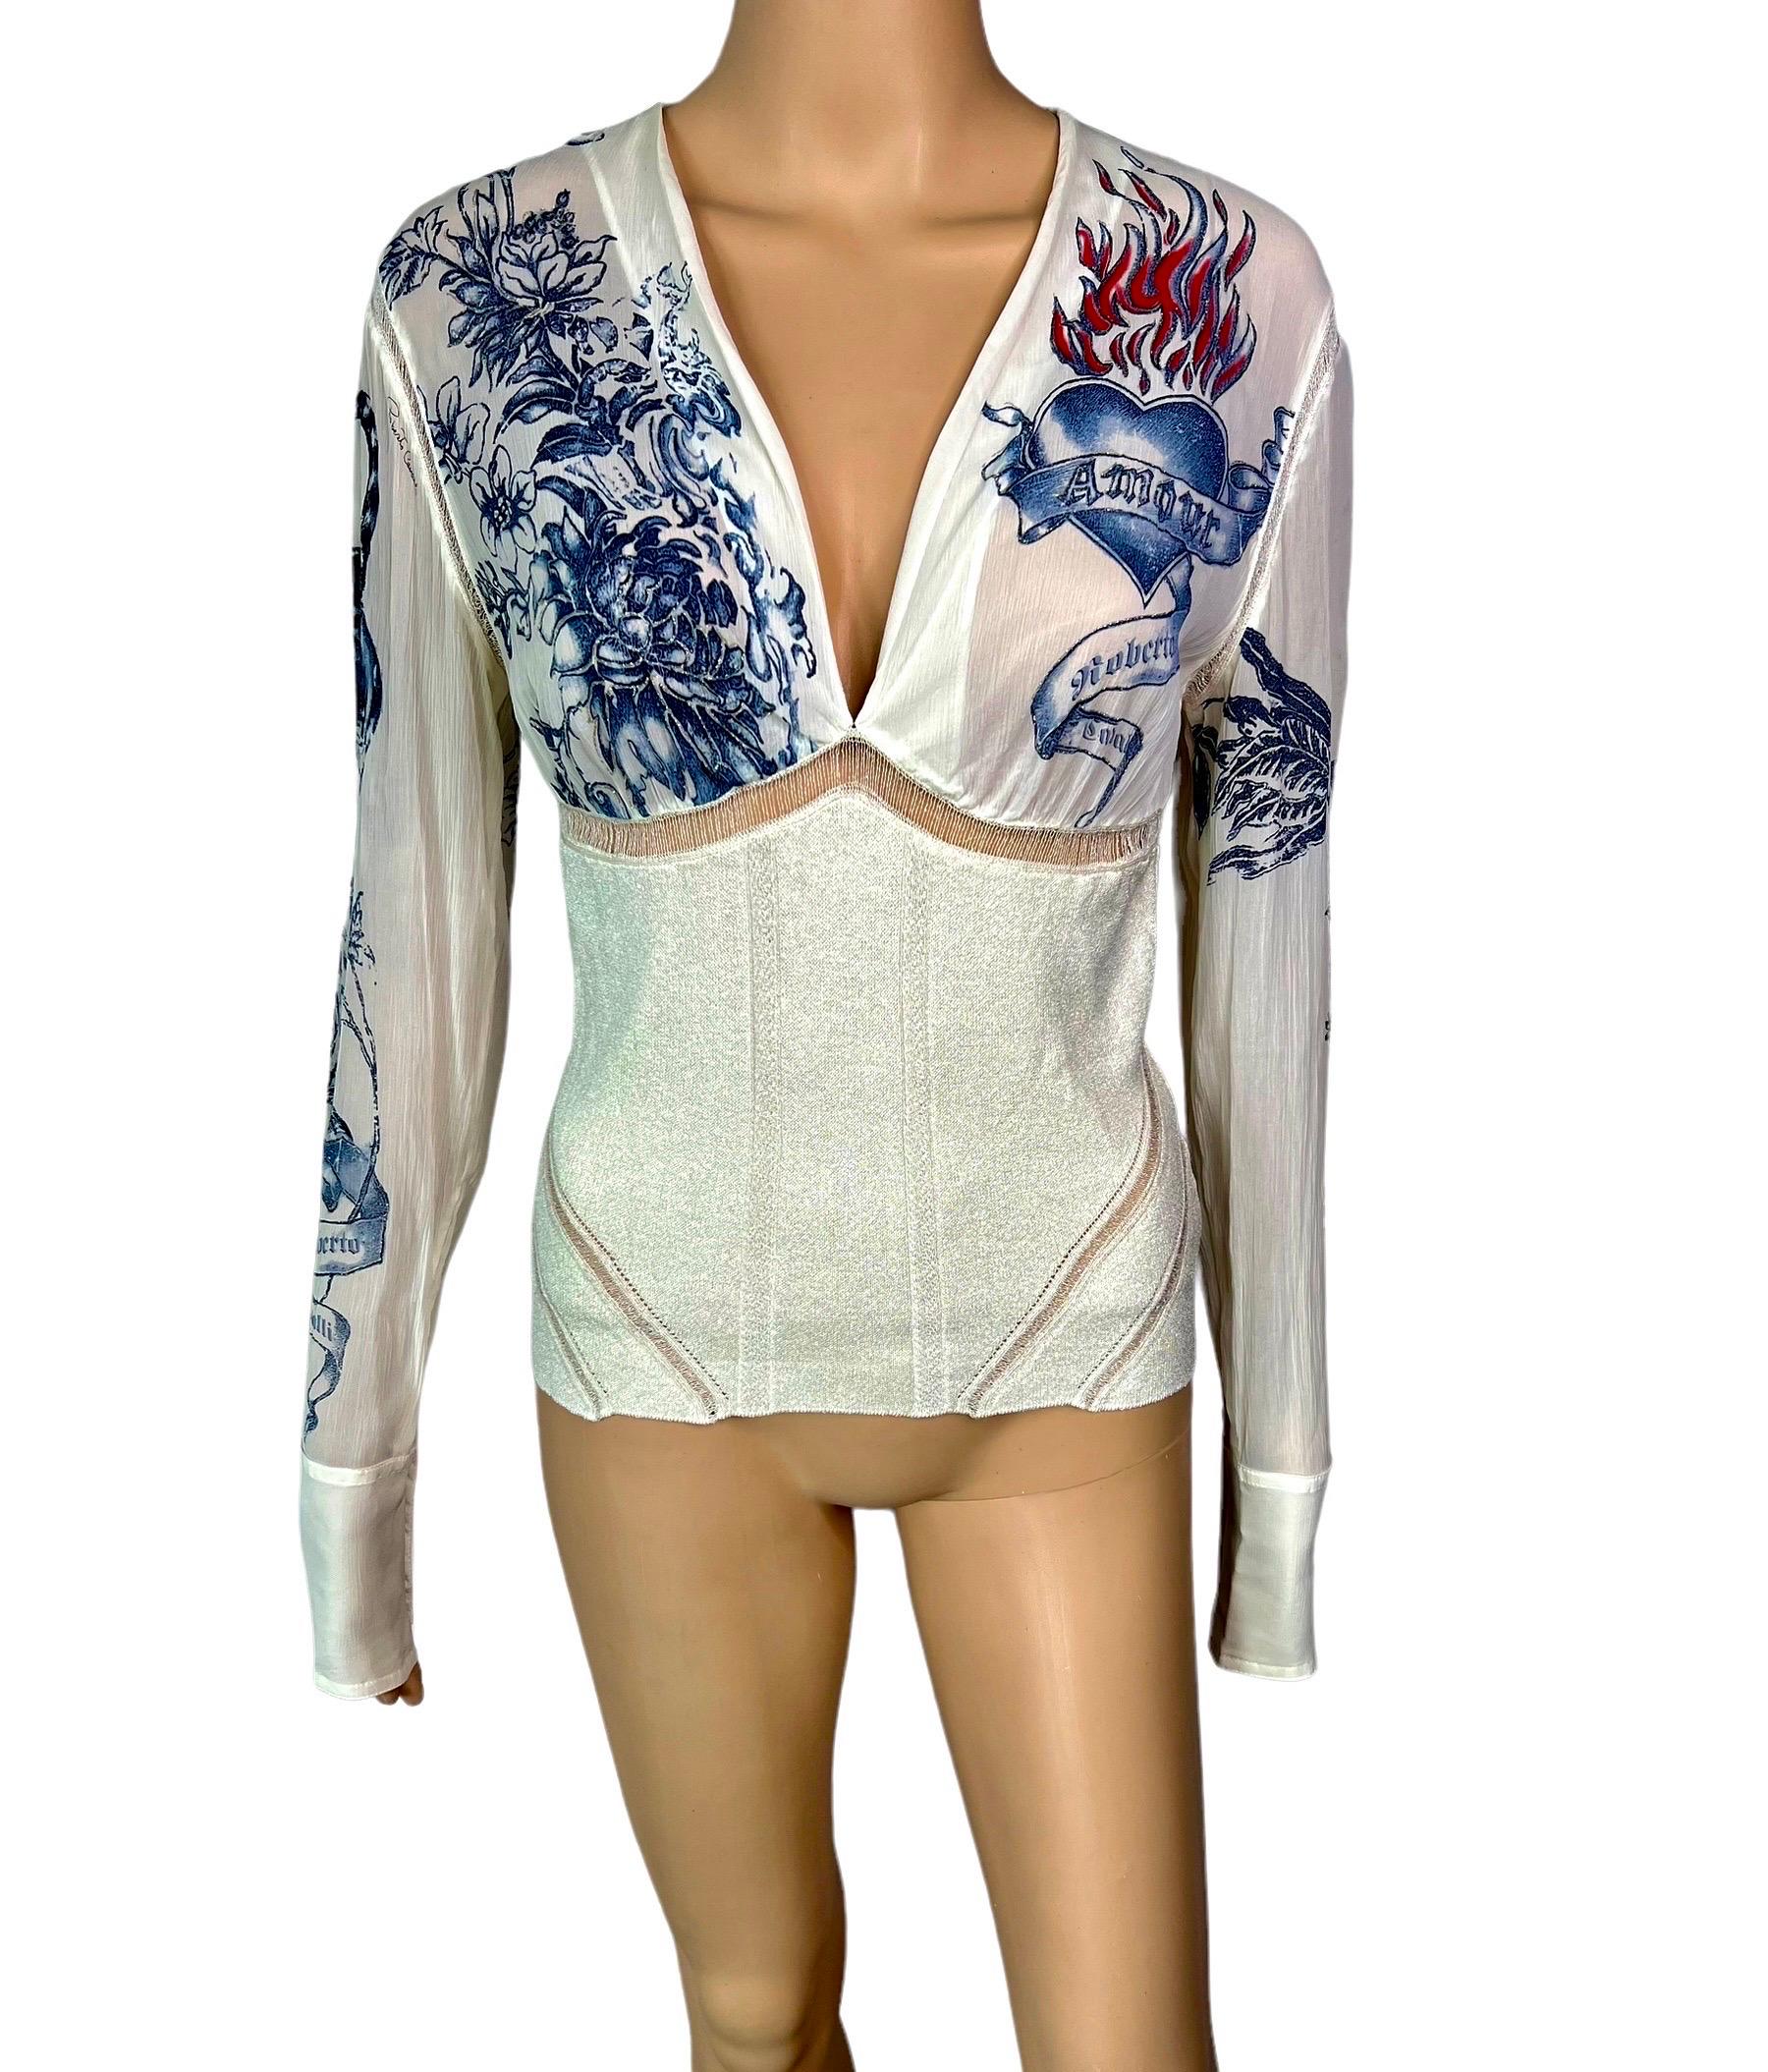 Women's Roberto Cavalli S/S 2003 Tattoo Print Plunging Silk Knit Sheer Panels Blouse Top For Sale